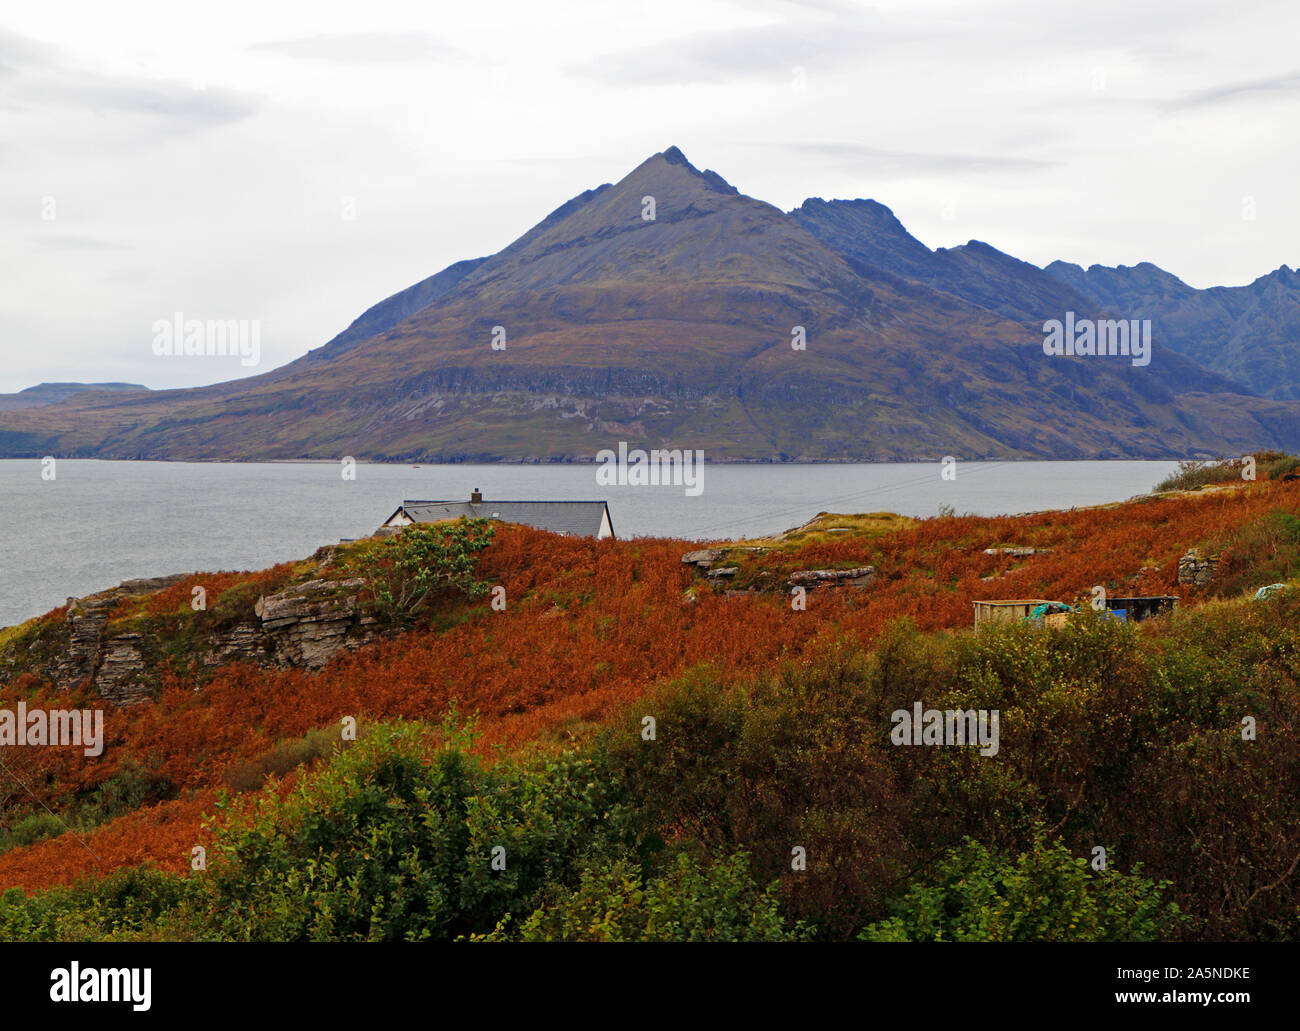 A view across Loch Scavaig to the Cuillin Hills from Elgol, Strathaird, Isle of Skye, Scotland, United Kingdom, Europe. Stock Photo